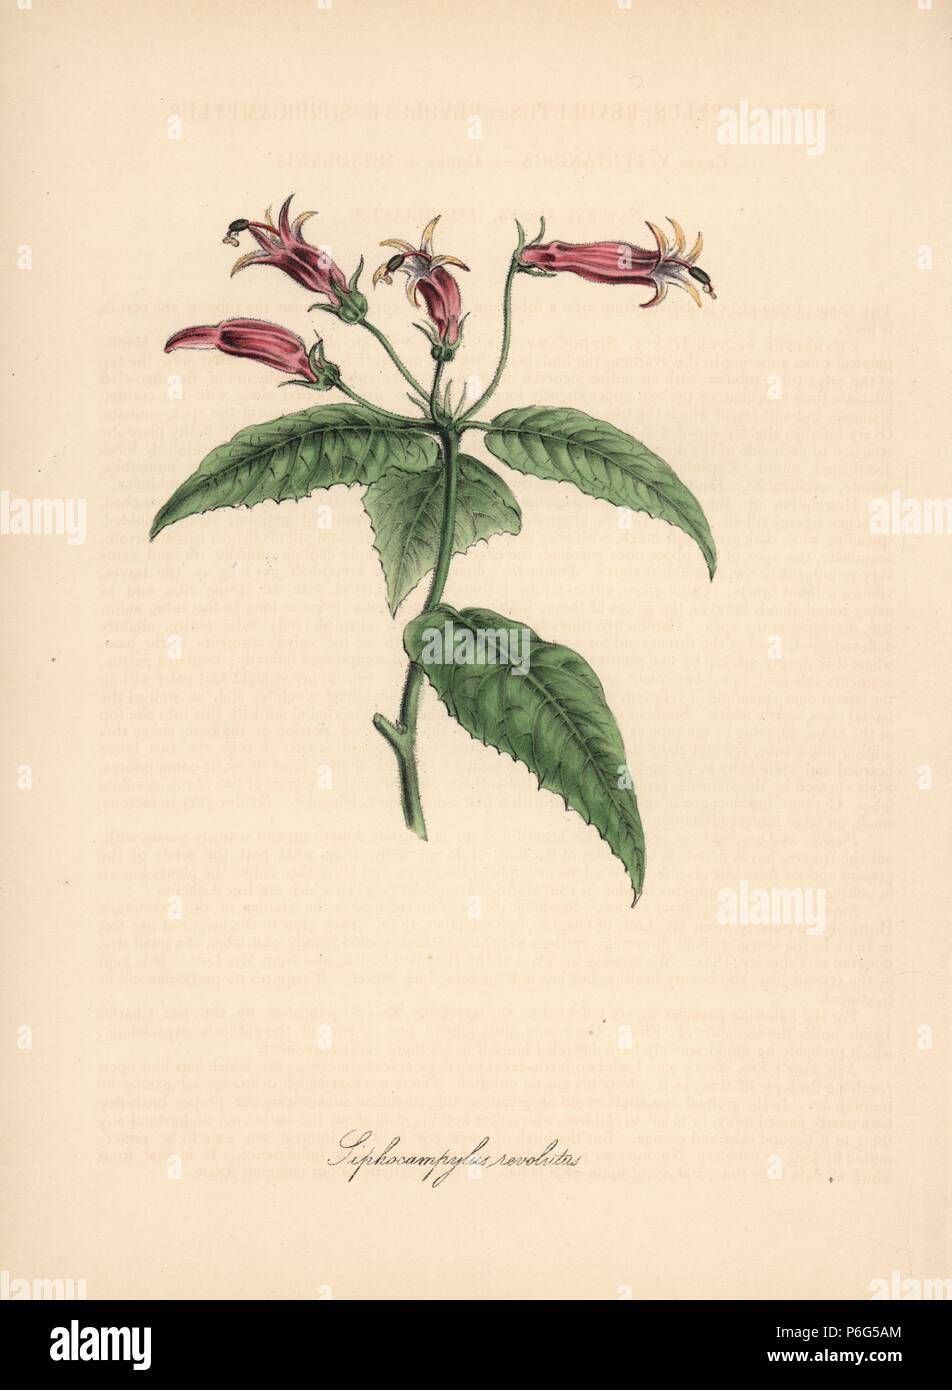 Siphocampylus reticulatus, endangered. Handcoloured zincograph by C. Chabot drawn by Miss M. A. Burnett from her 'Plantae Utiliores: or Illustrations of Useful Plants,' Whittaker, London, 1842. Miss Burnett drew the botanical illustrations, but the text was chiefly by her late brother, British botanist Gilbert Thomas Burnett (1800-1835). Stock Photo